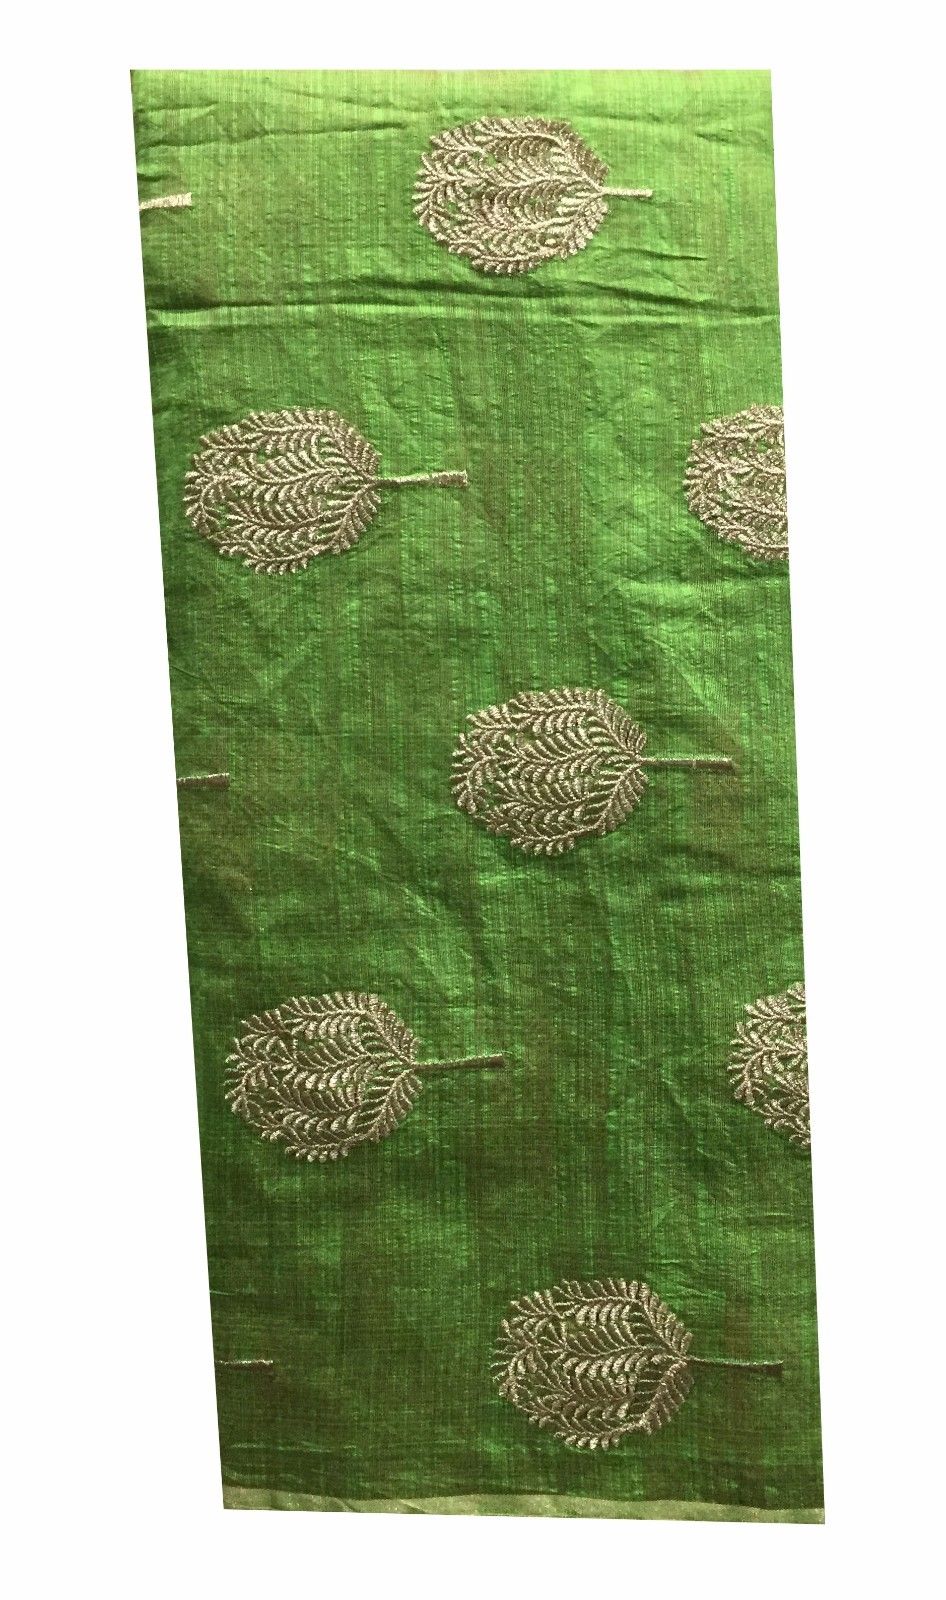 embroidered fabric for dresses buy cloth material online india Embroidered Cotton Light Green, Gold 43 inches Wide 8098